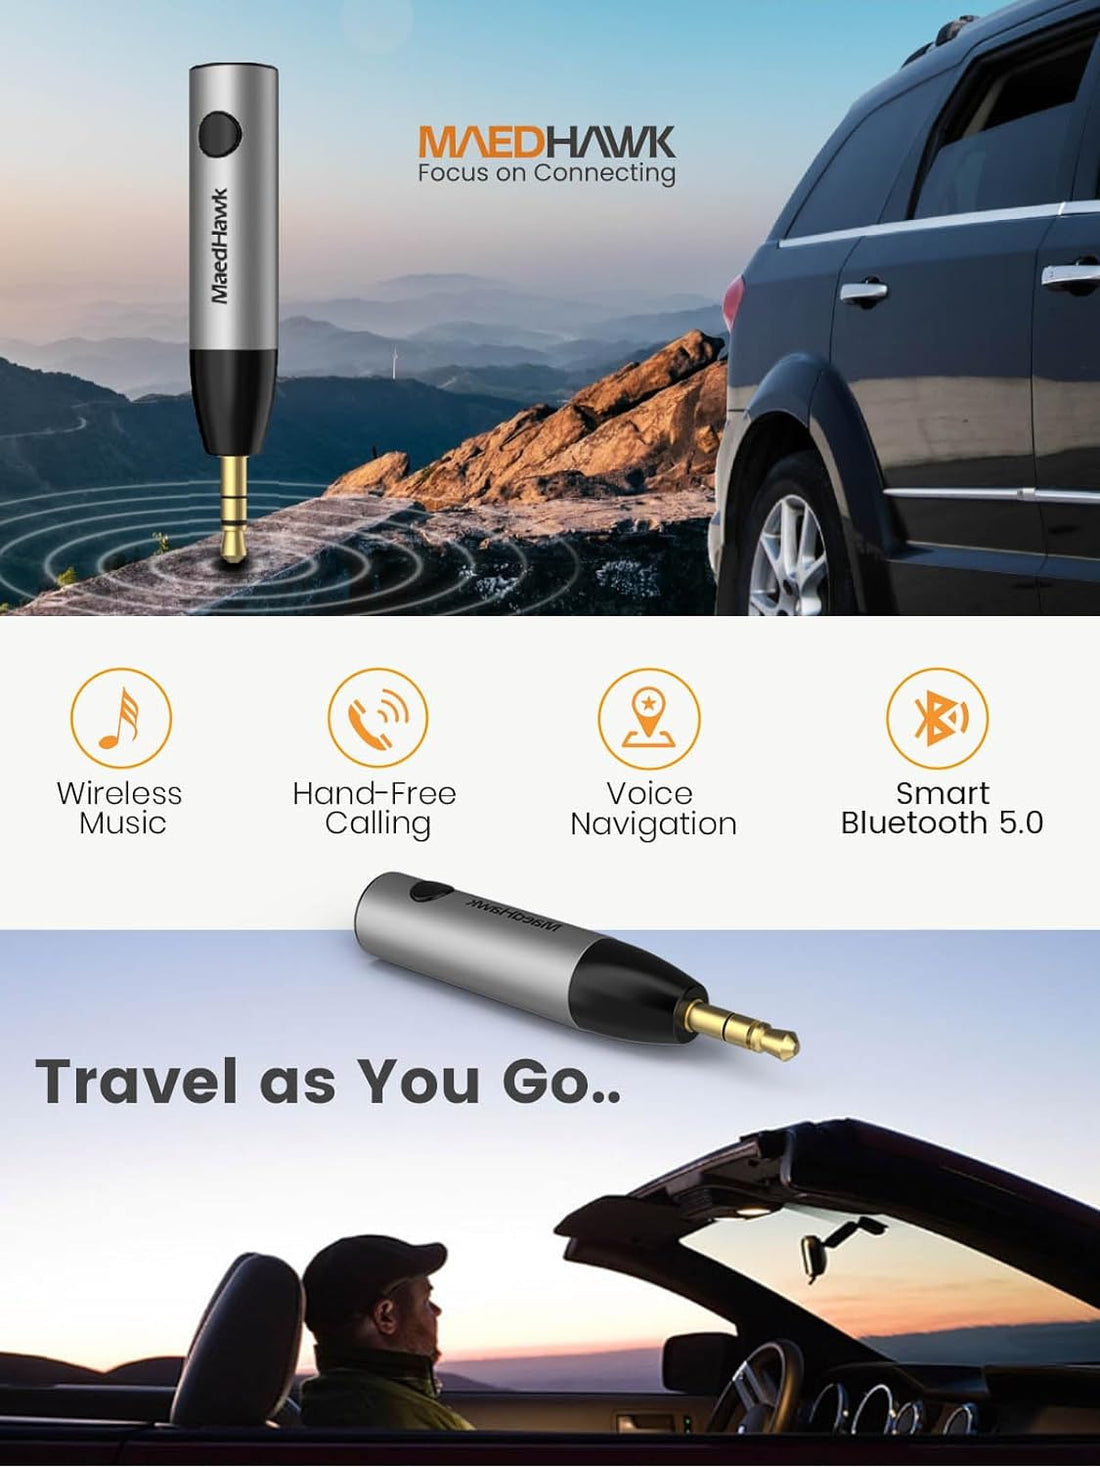 Bluetooth 5.0 Receiver, MaedHawk Bluetooth Aux Adapter/Portable Wireless Audio Car Kit (A2DP, Built in Microphone, Dual Link) with 3.5mm Jack for Home Music Streaming Stereo,Headphones,Speakers